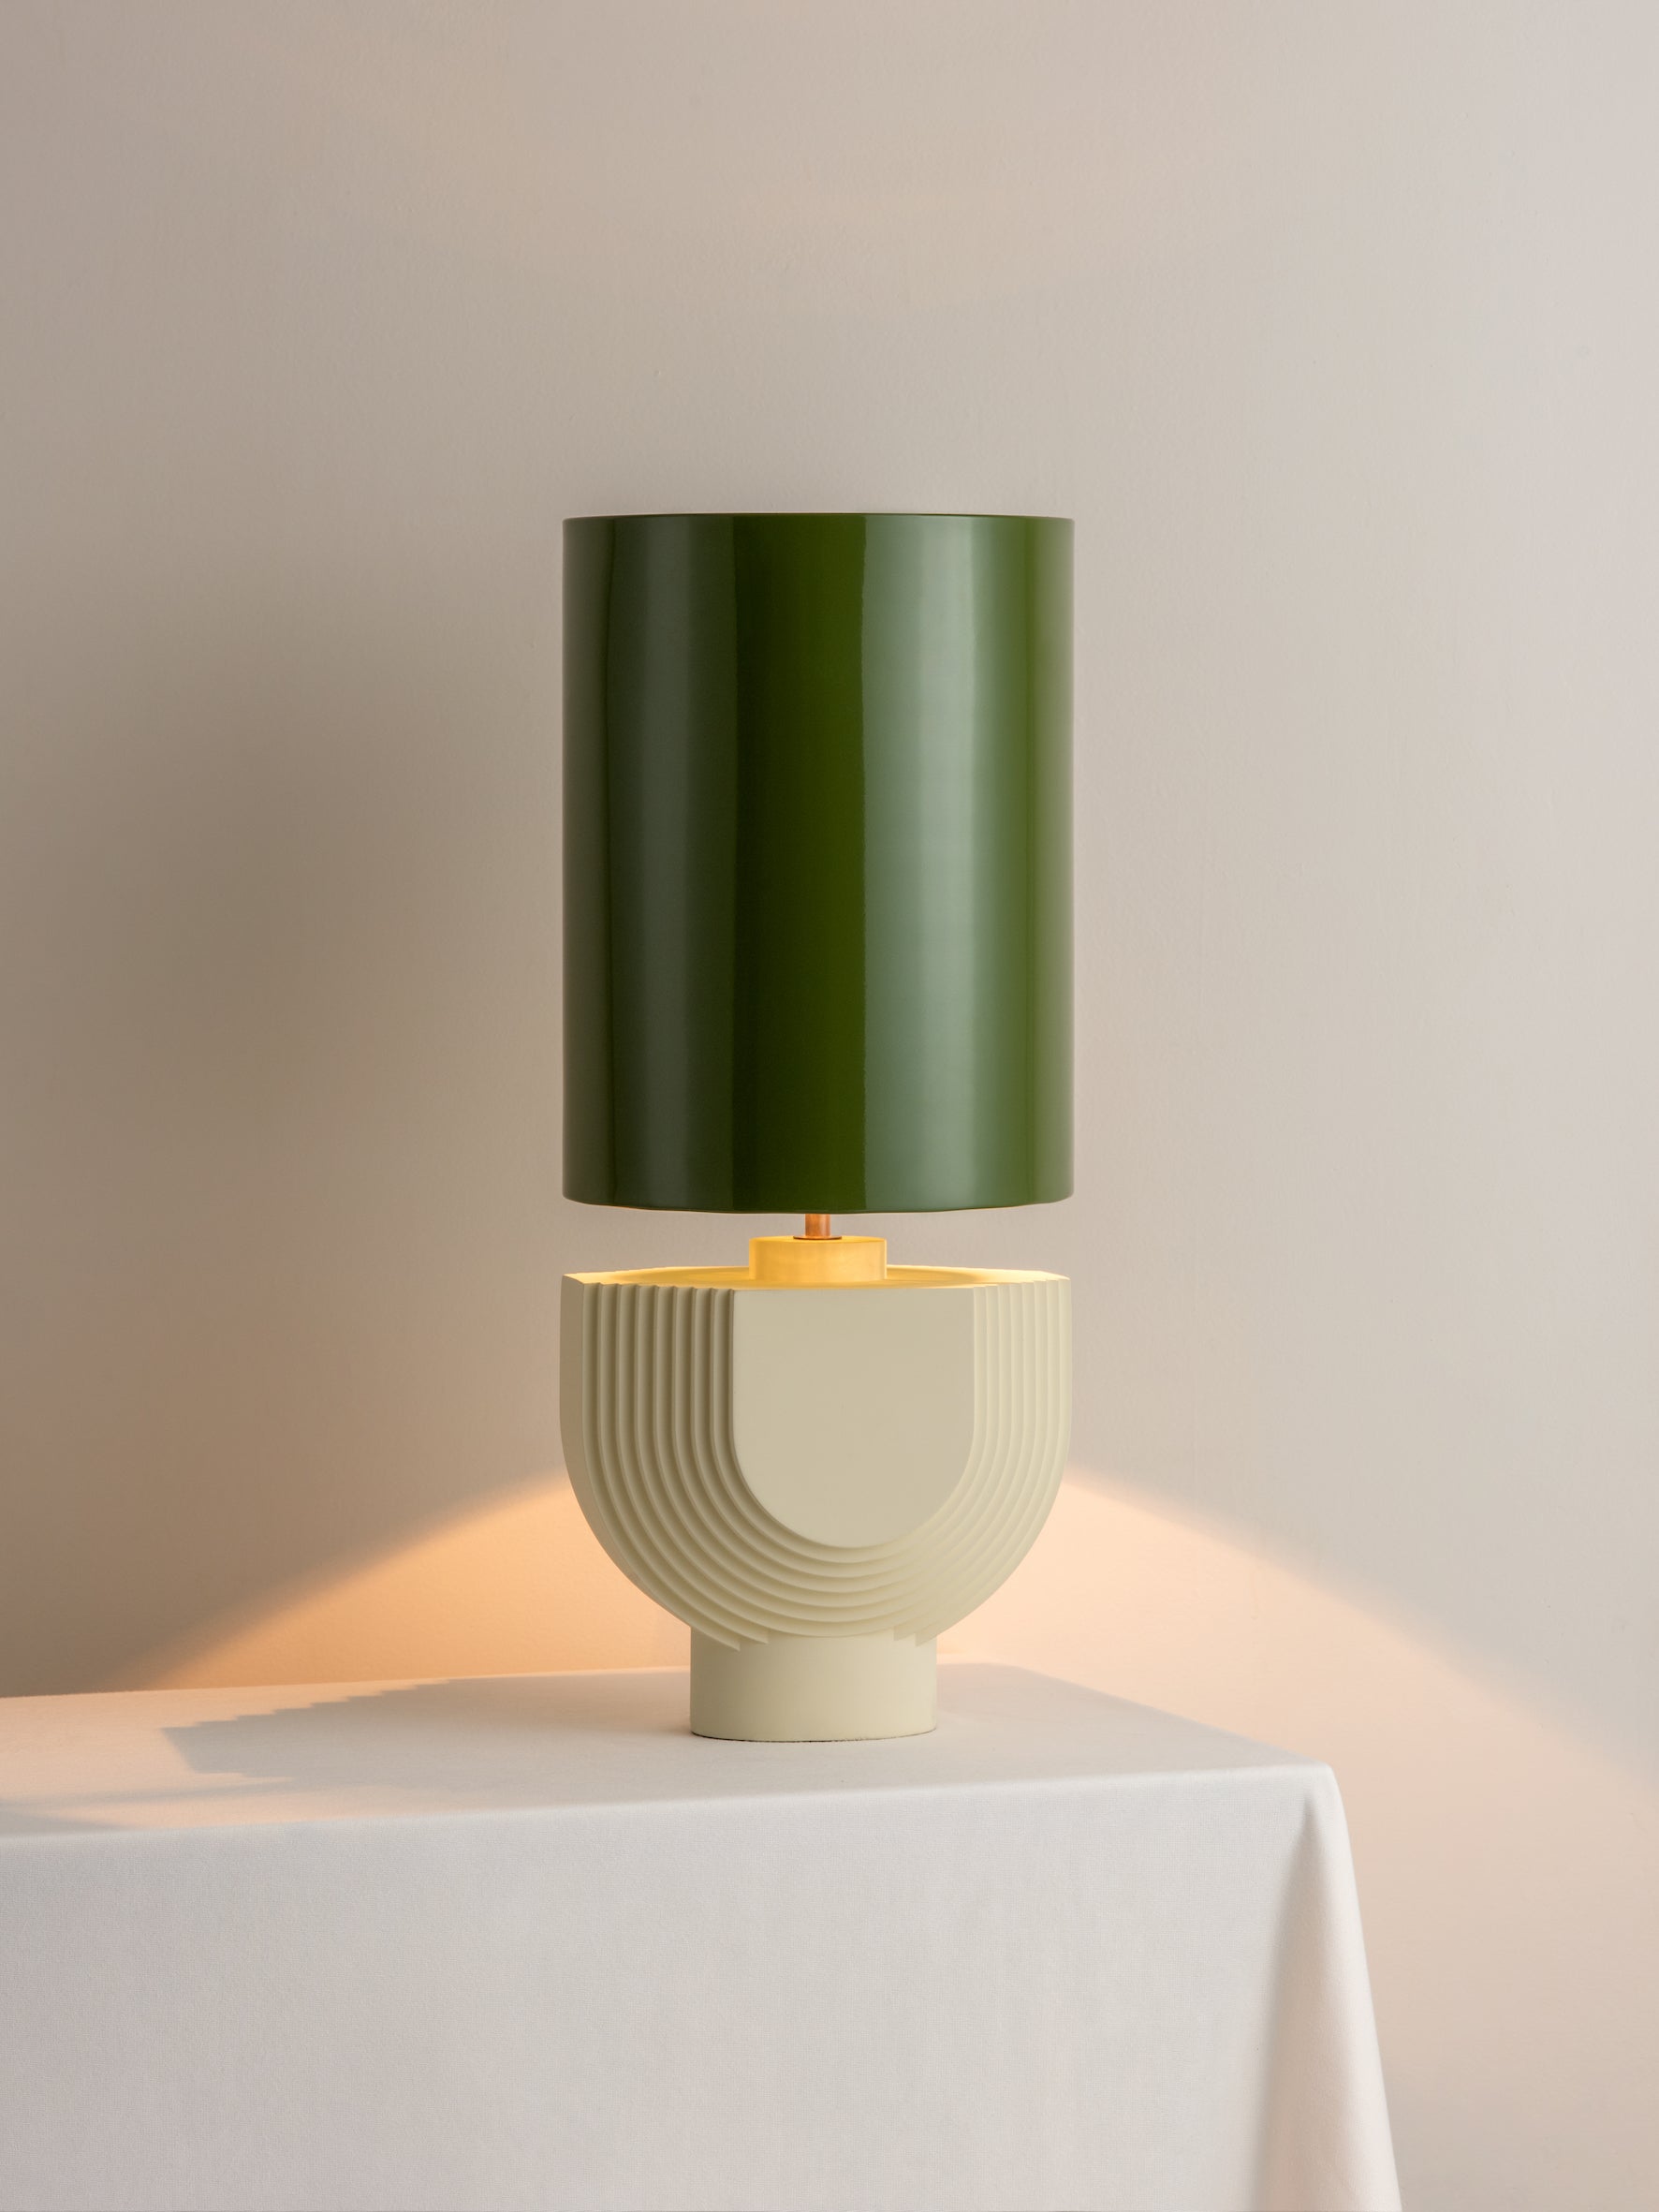 Editions concrete lamp with + green lacquer shade | Table Lamp | Lights & Lamps Inc | Modern Affordable Designer Lighting | USA